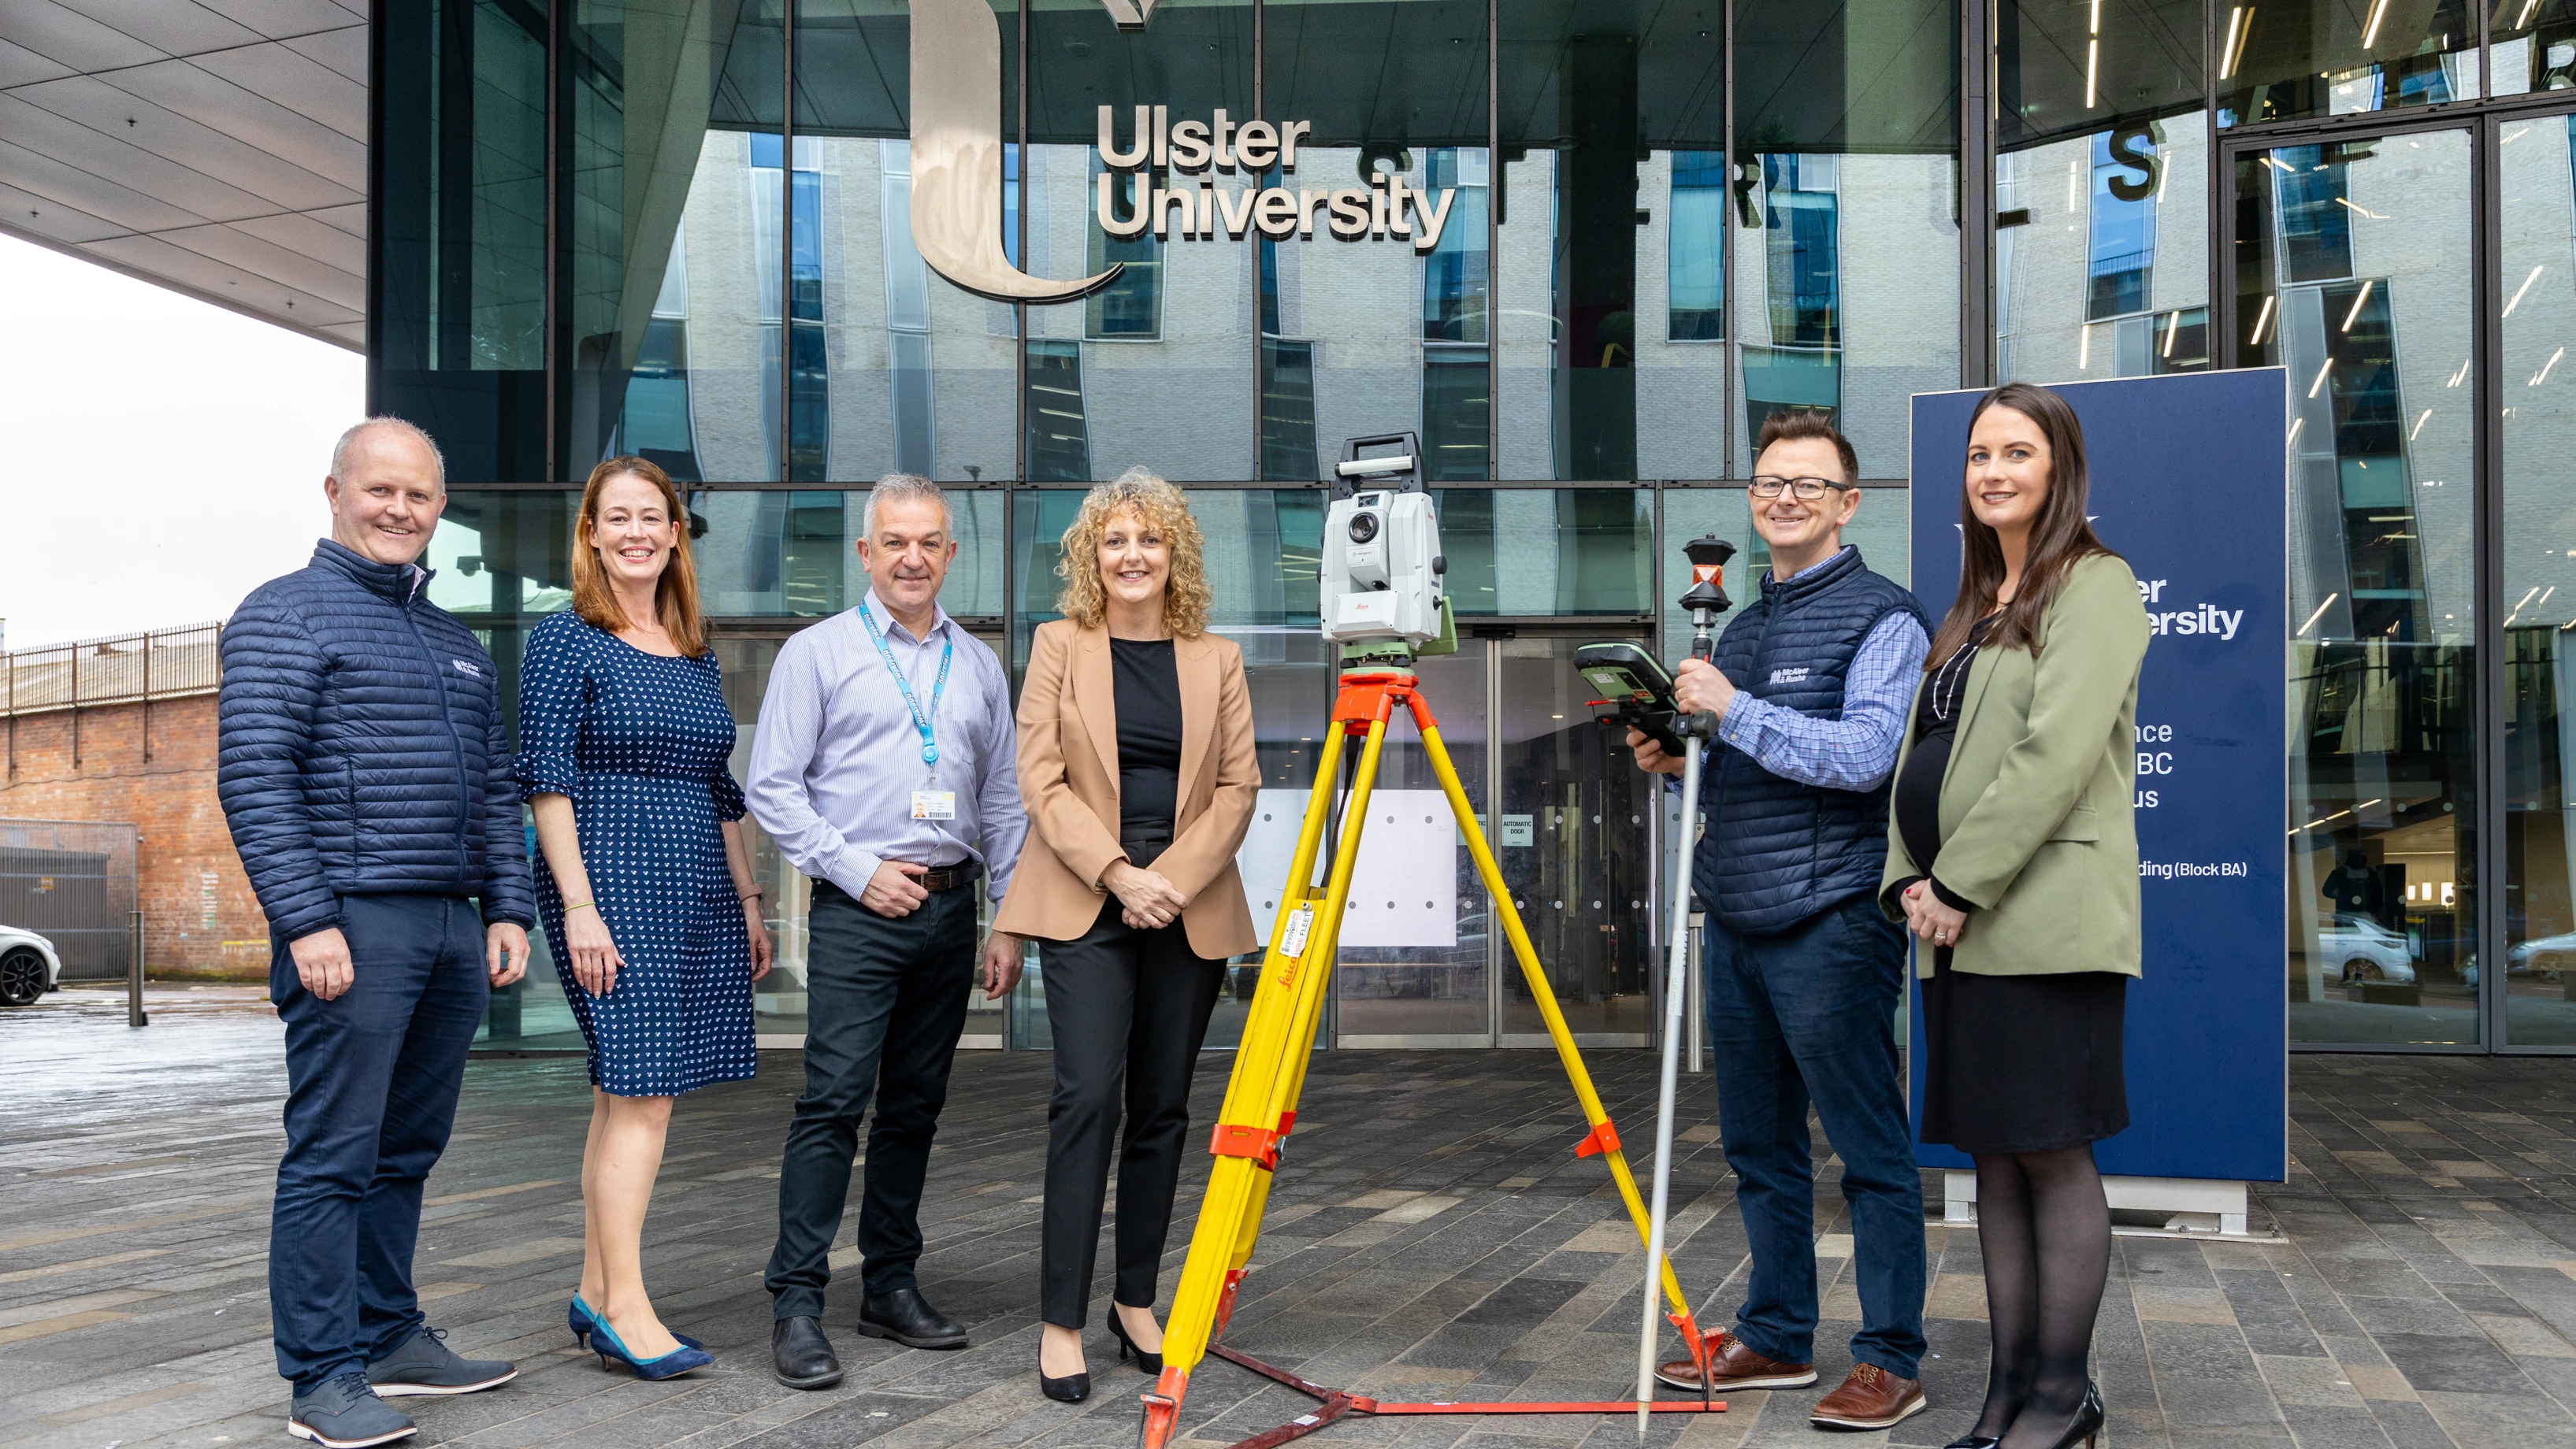 McAleer & Rushe Launches Degree Apprenticeship Programme With Ulster University